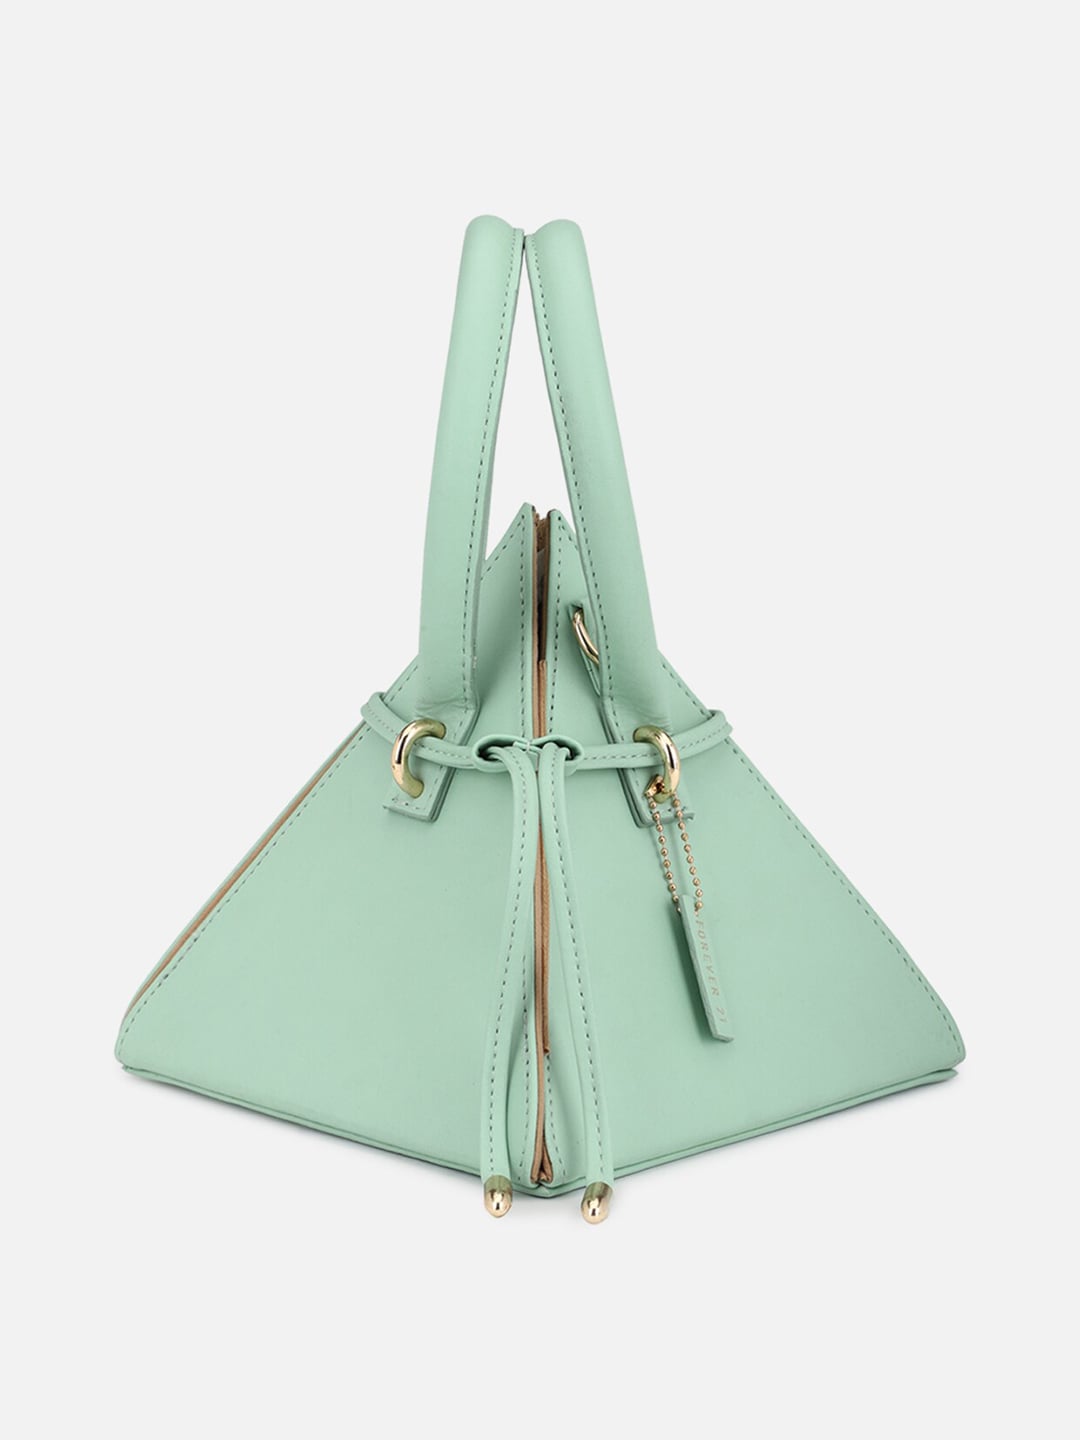 FOREVER 21 Green PU Structured Handheld Bag Price in India